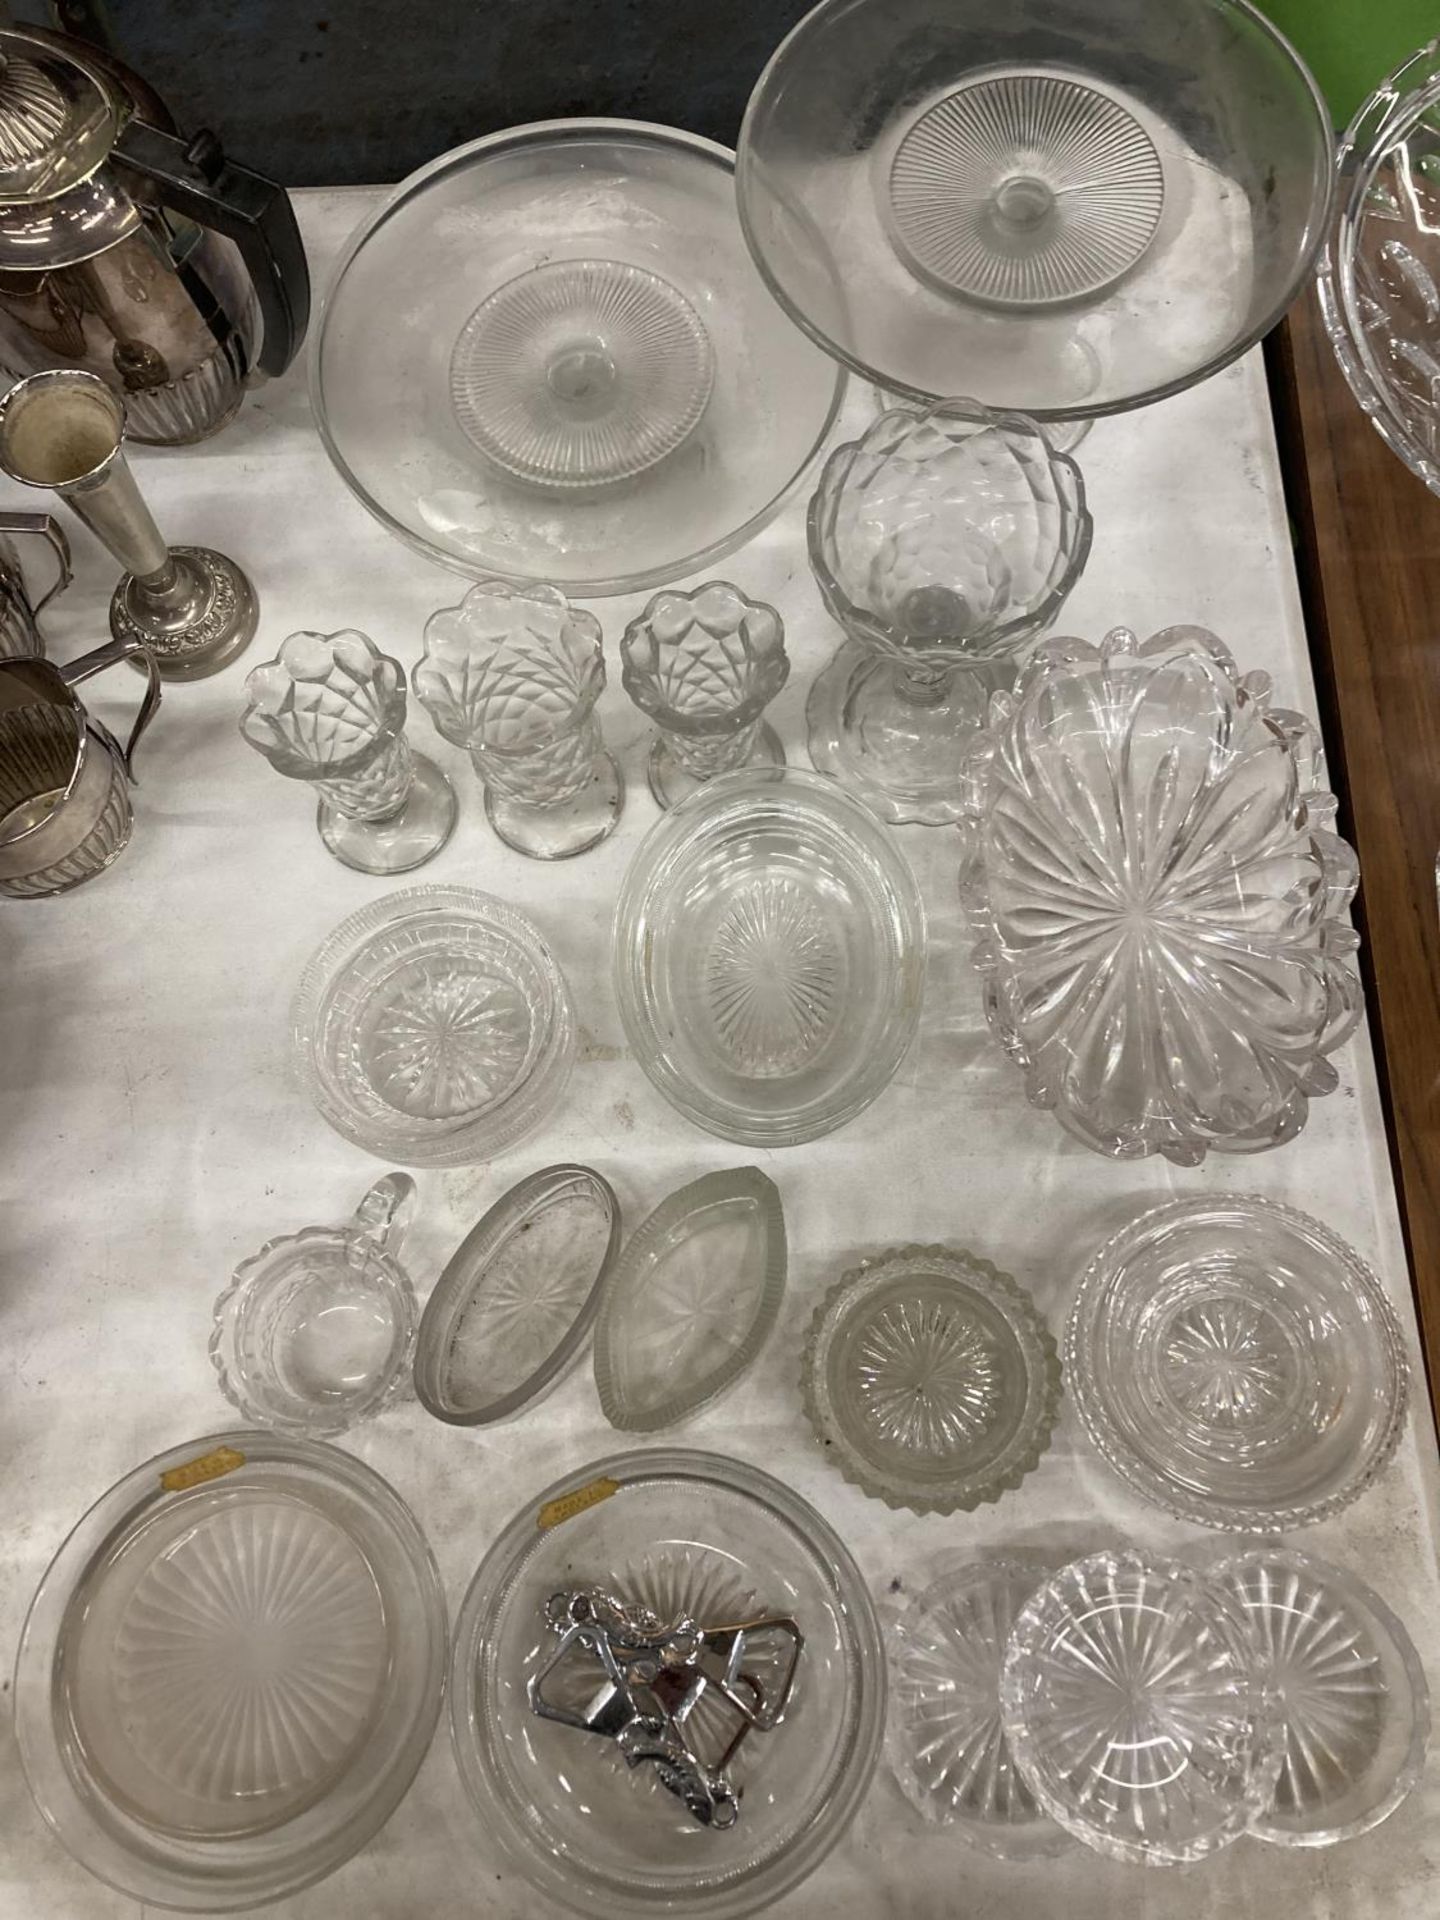 A QUANTITY OF GLASSWARE TO INCLUDE CAKE STANDS, VASES, BOWLS, DISHES, ETC